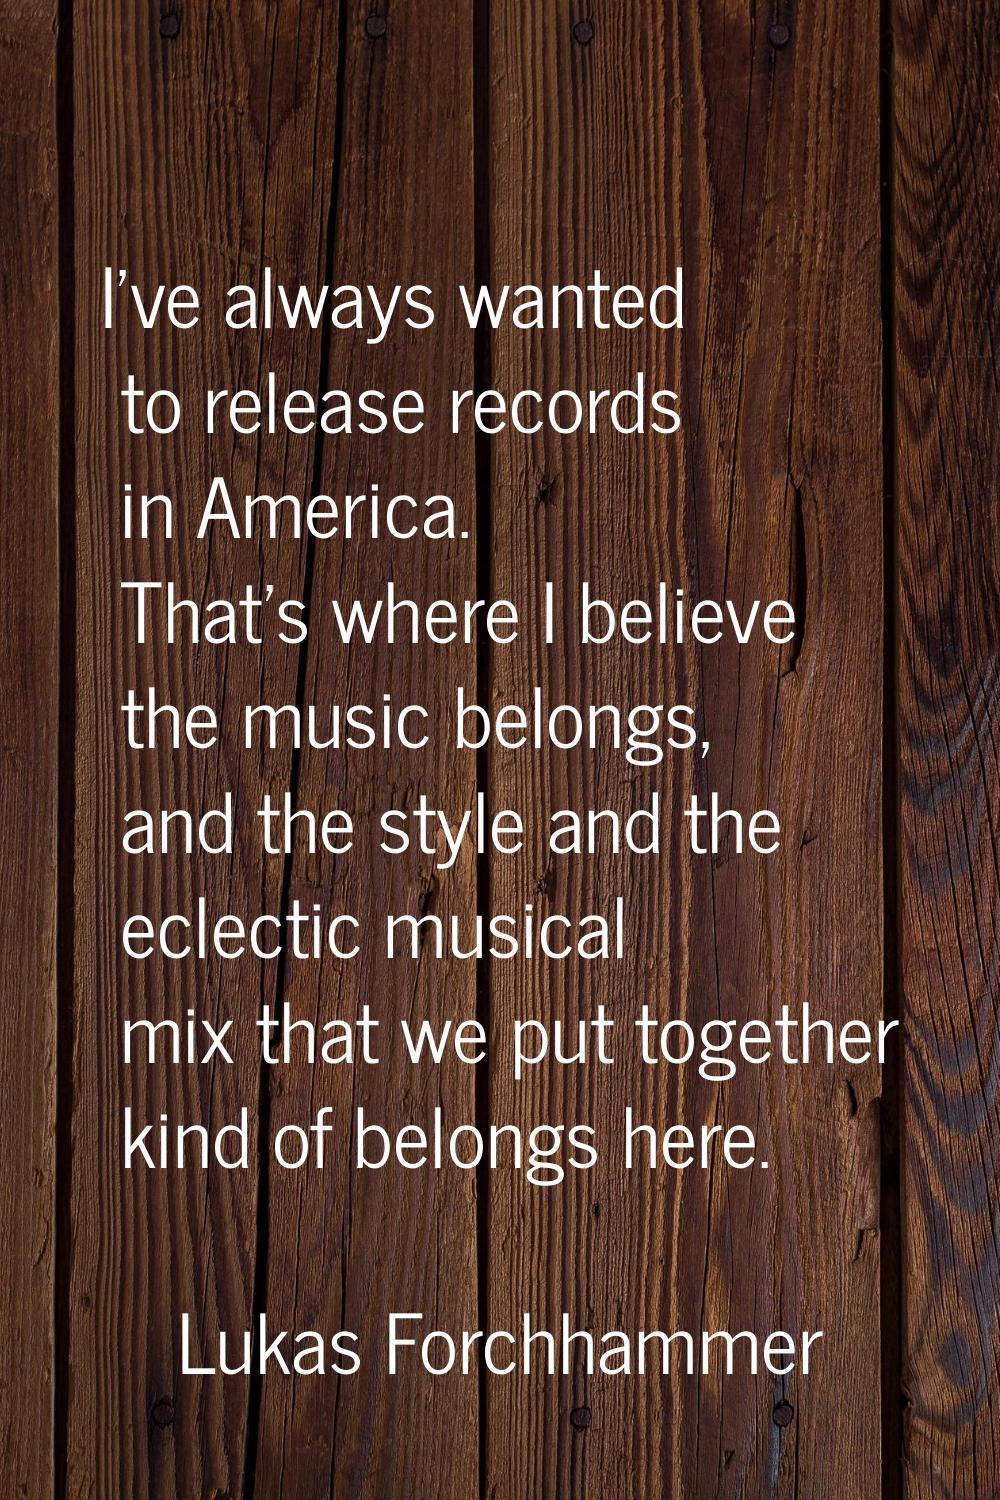 I've always wanted to release records in America. That's where I believe the music belongs, and the